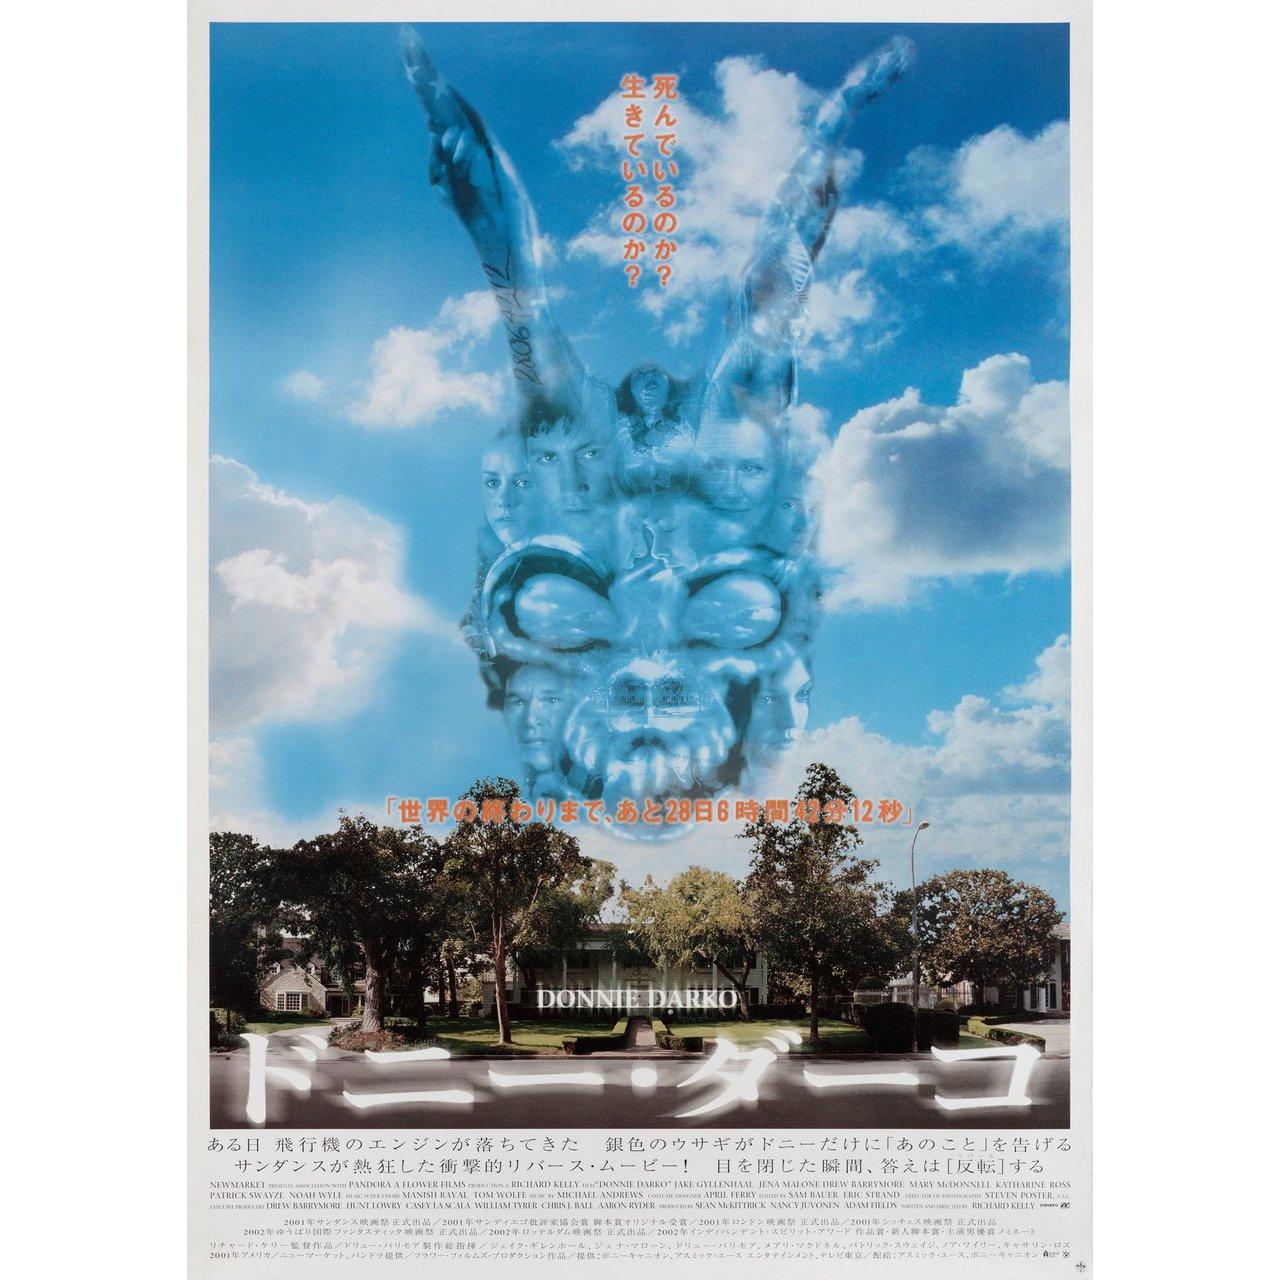 Original 2002 Japanese B2 poster for the film Donnie Darko directed by Richard Kelly with Jake Gyllenhaal / Holmes Osborne / Maggie Gyllenhaal / Daveigh Chase. Very Good-Fine condition, rolled. Please note: the size is stated in inches and the